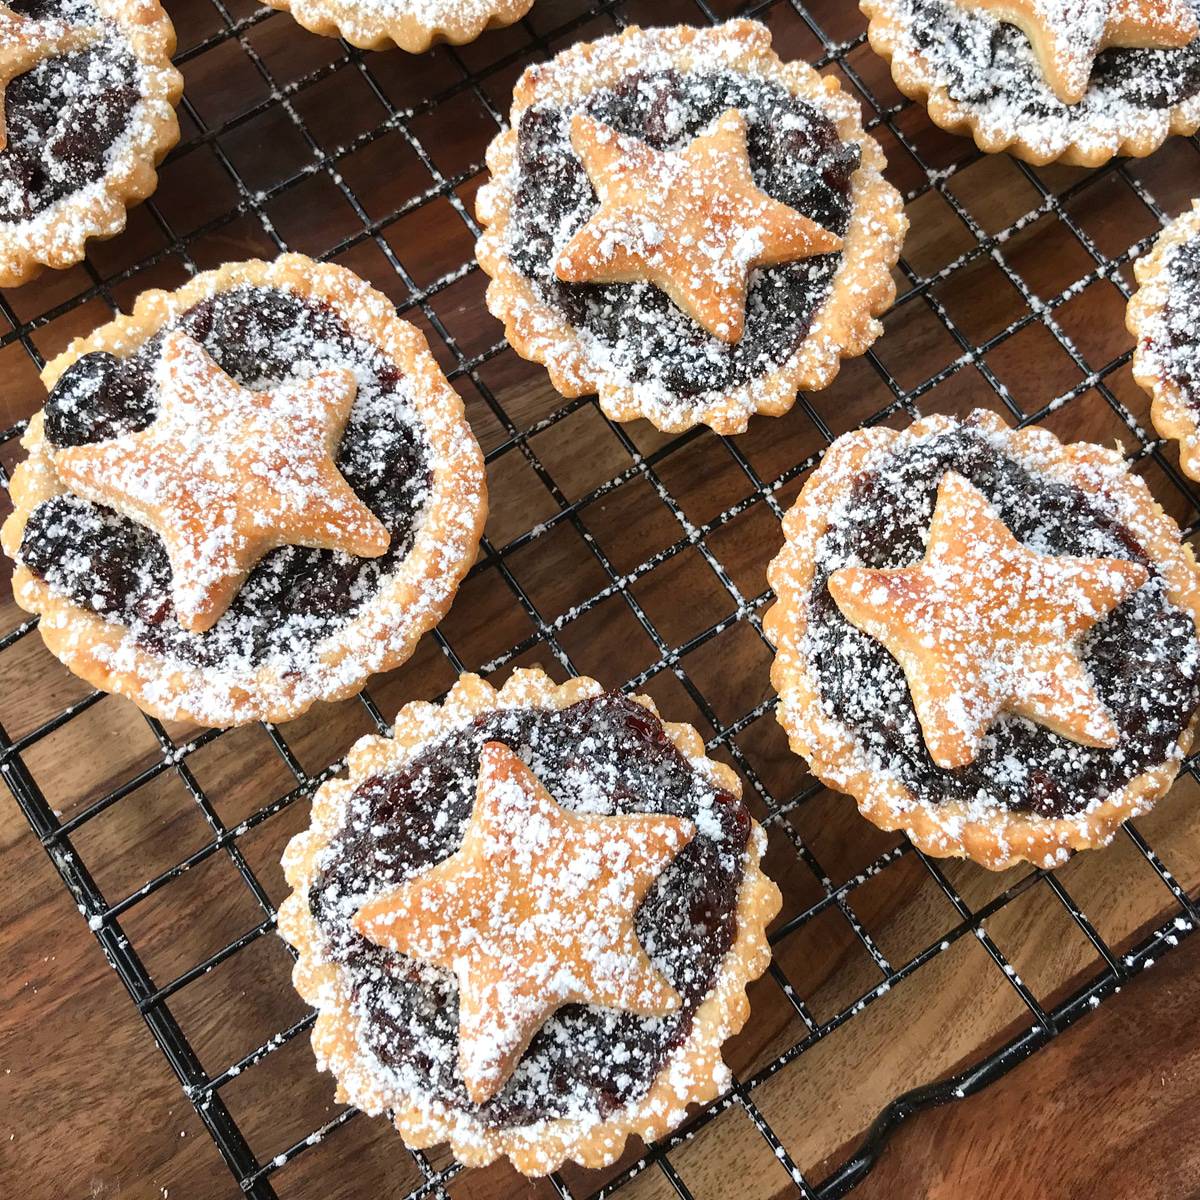 mince pies recipe mincemeat pie best traditional authentic British English from scratch